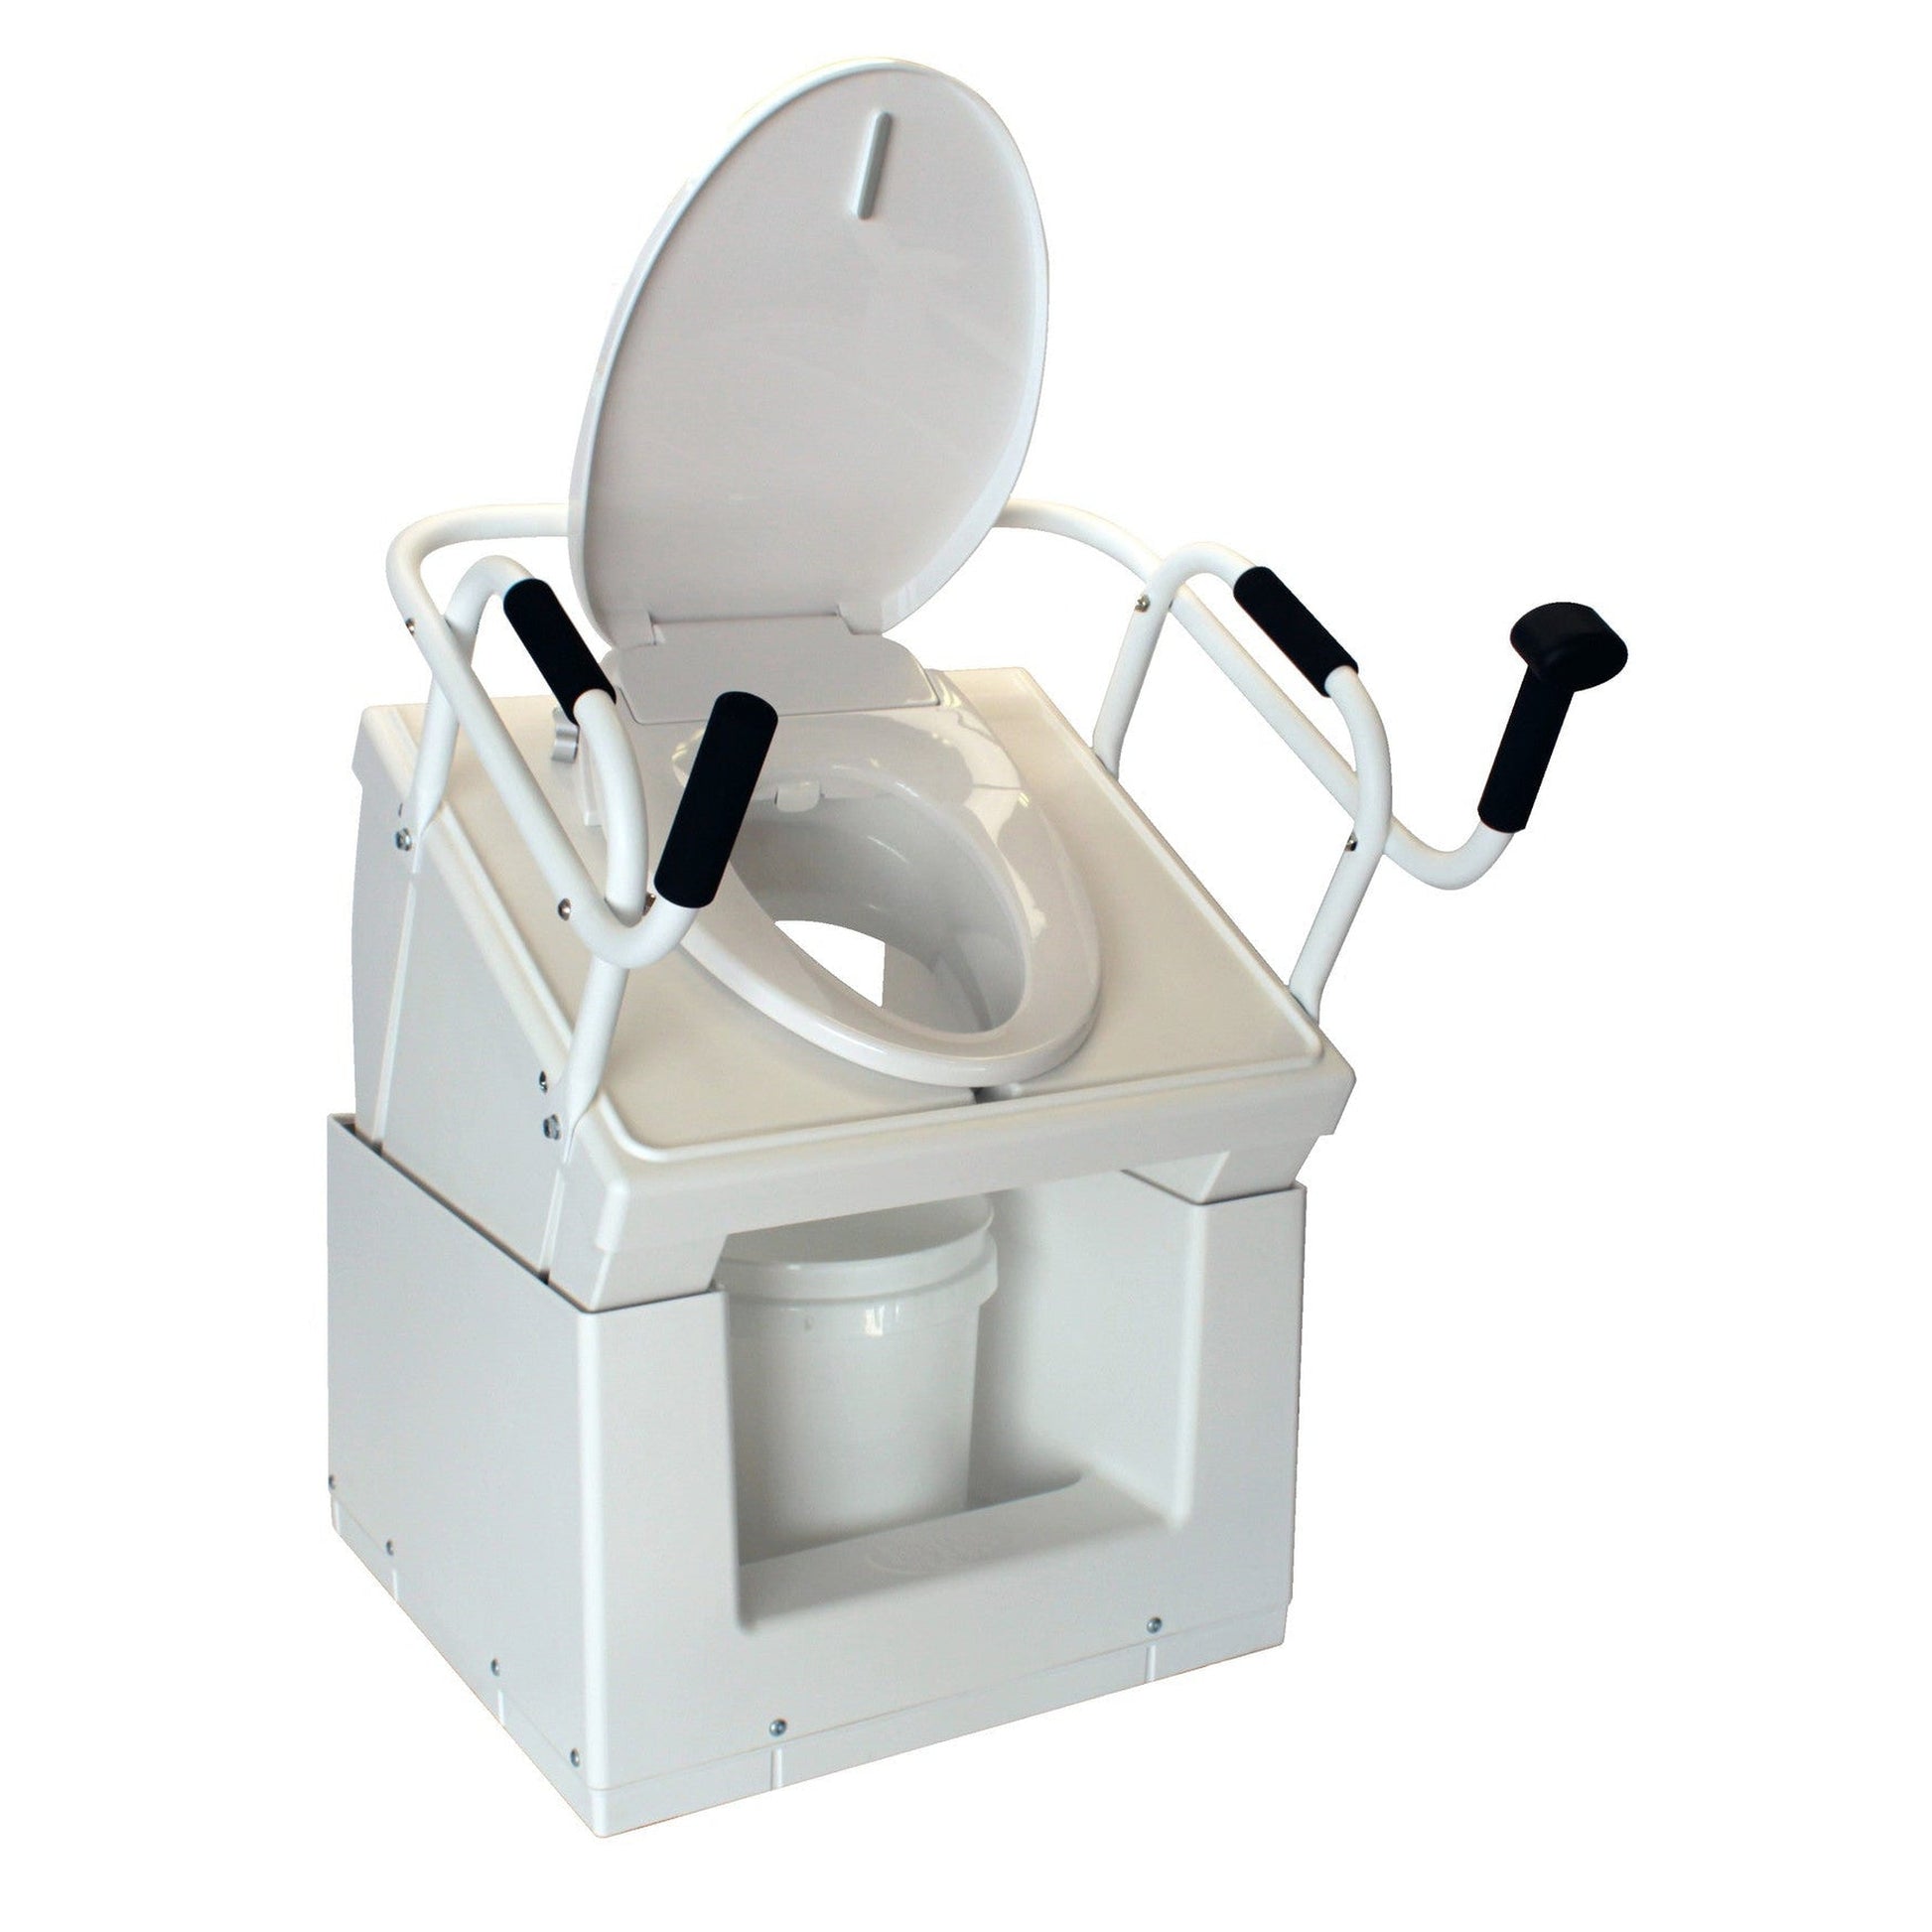 https://usbathstore.com/cdn/shop/products/Throne-Buttler-37-Powered-Bedside-Toilet-Lift-With-26-Standard-Handle-Bar-Upgraded-Soft-Close-Toilet-Seat-and-Commode-Conversion-Kit.jpg?v=1683172899&width=1946